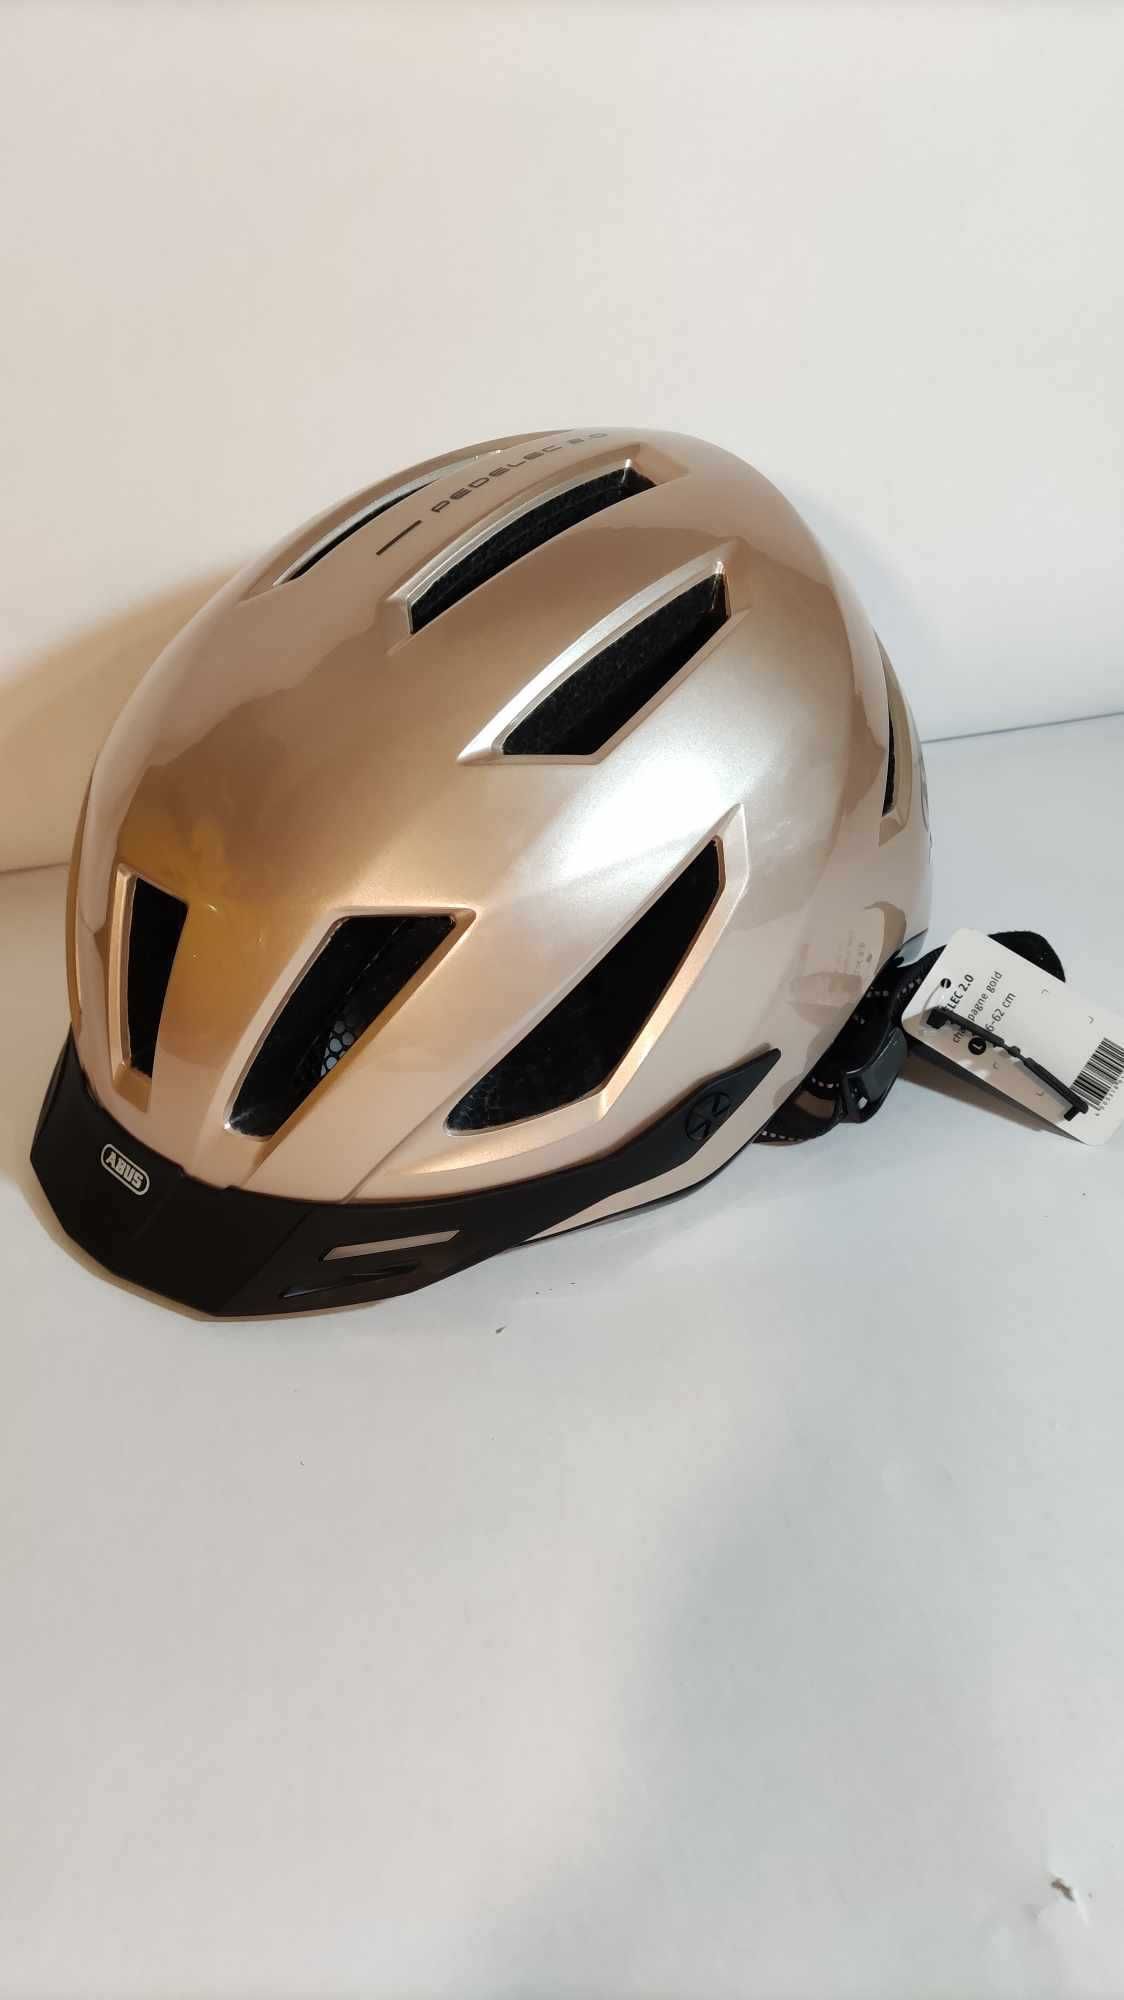 Kask rowerowy Abus Pedelec champagne Gold 2.0 r. L 56-62 (K)